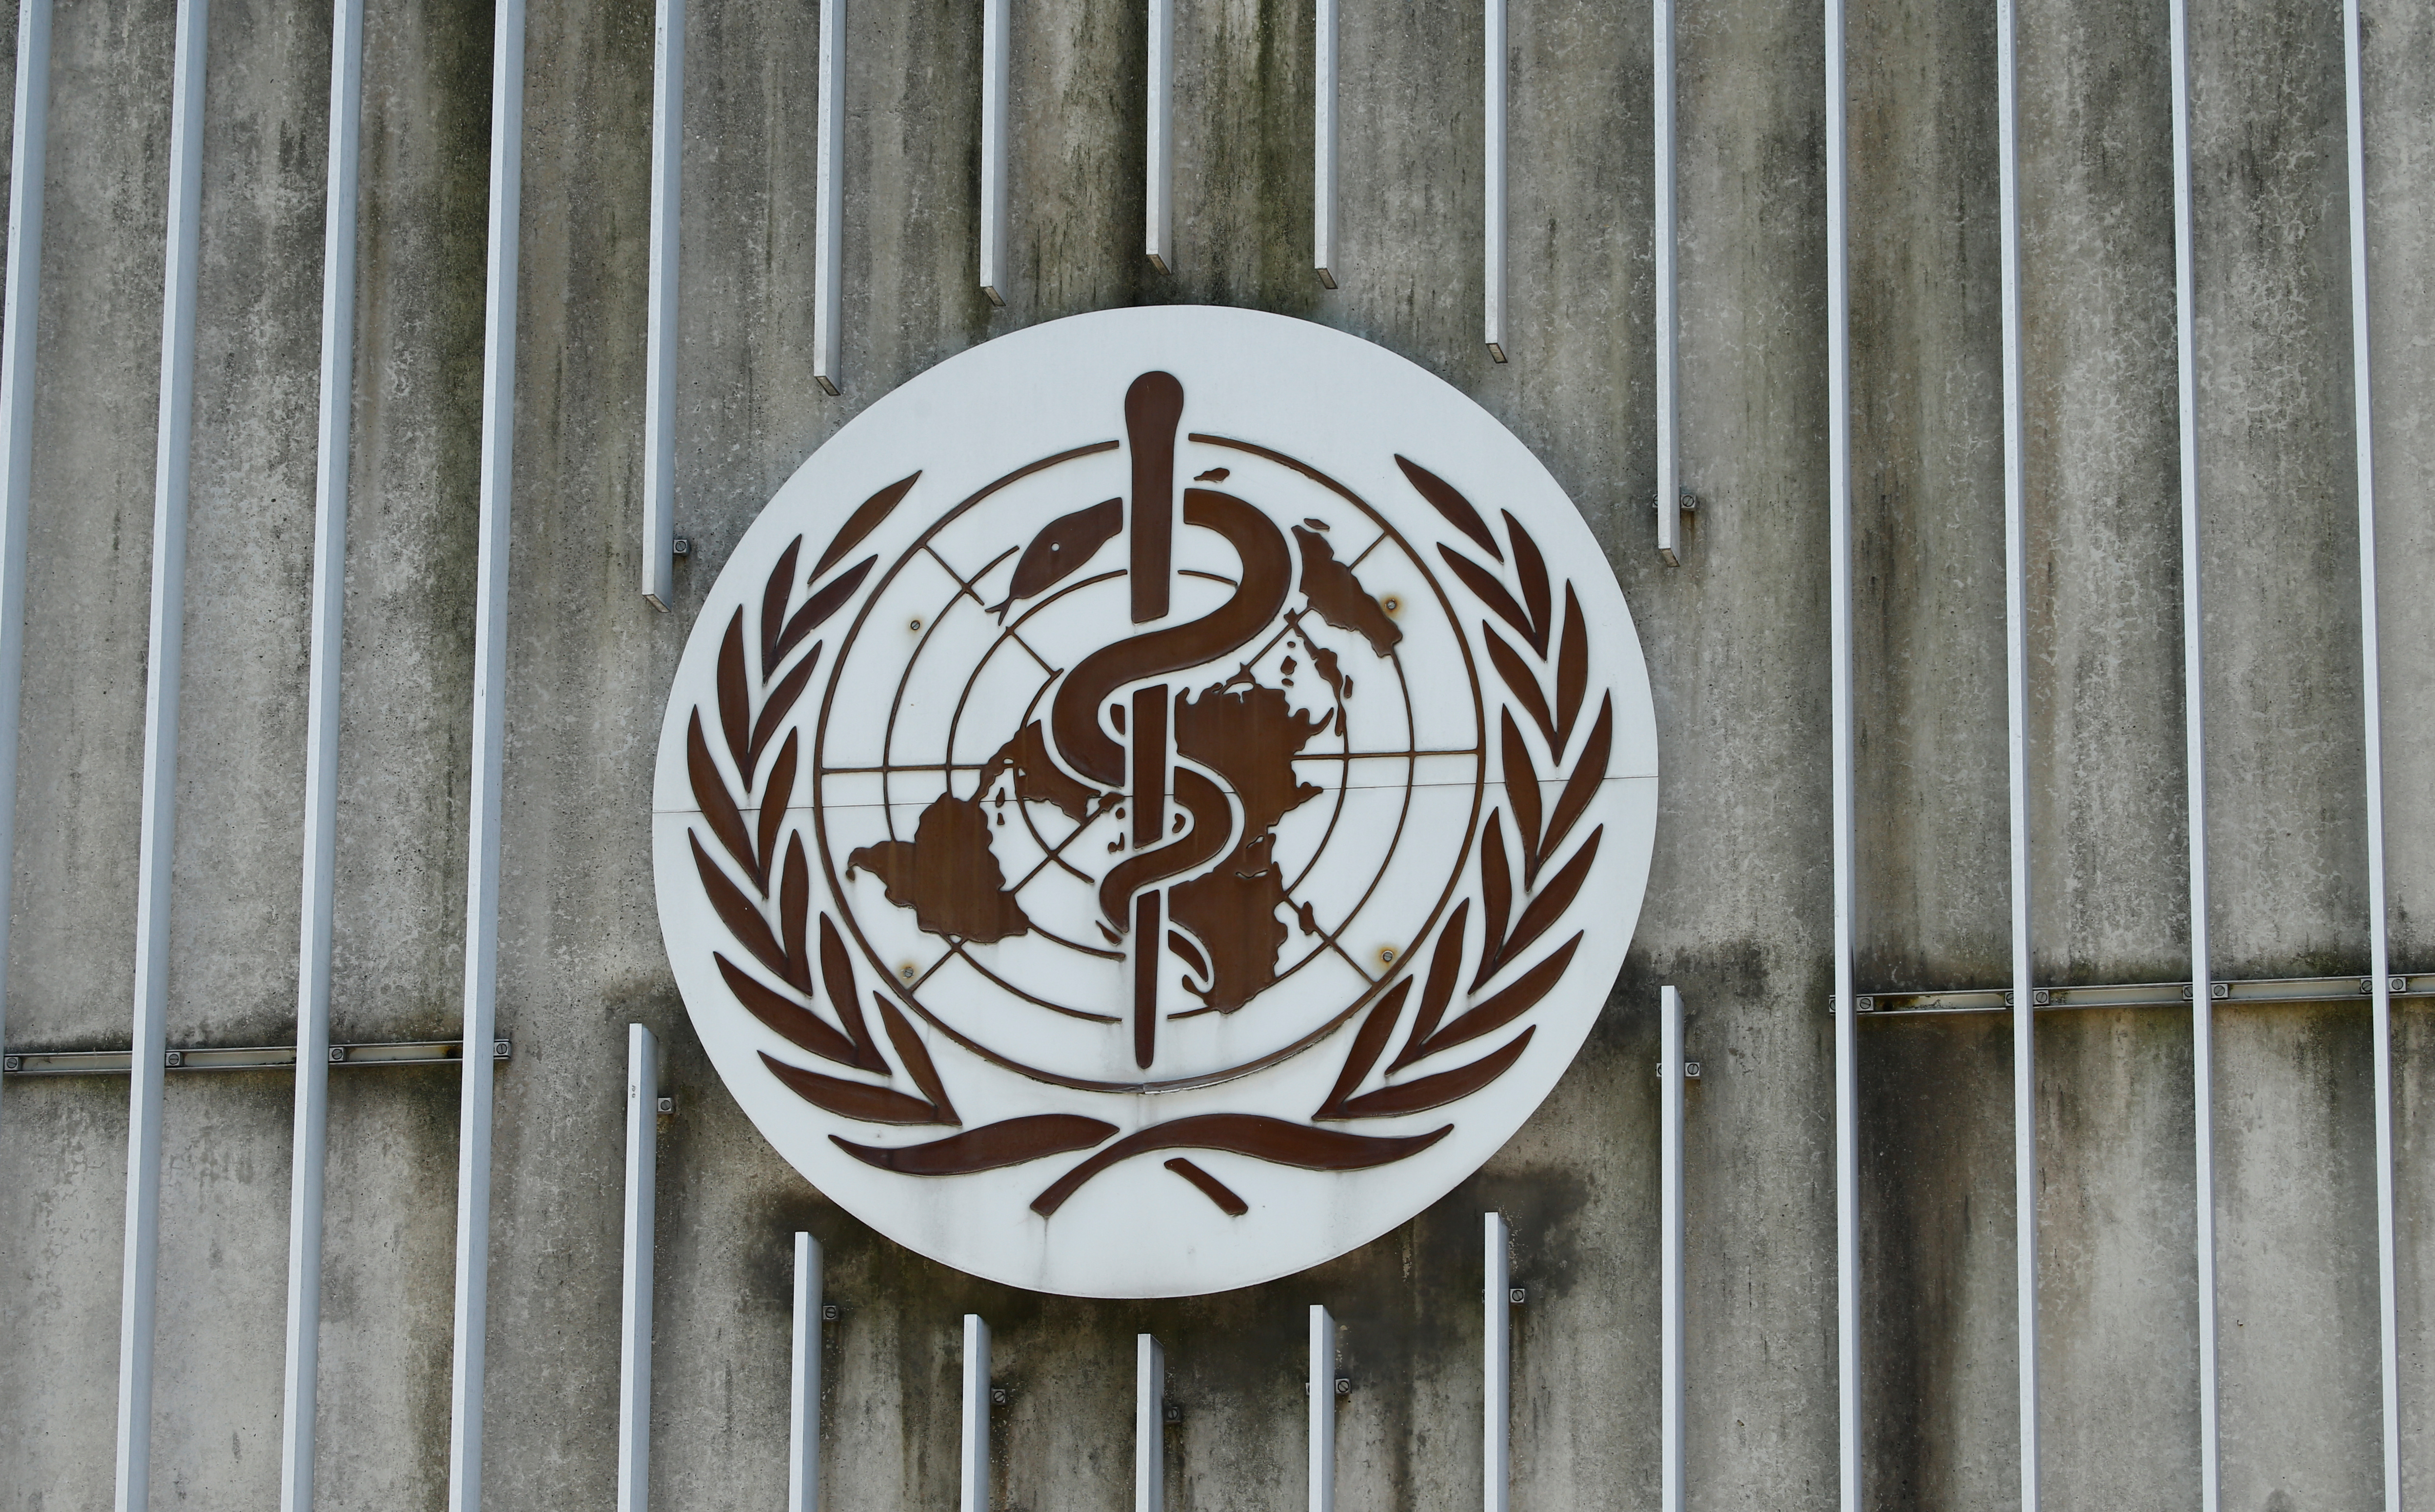 A logo is pictured on the headquarters of the WHO in Geneva